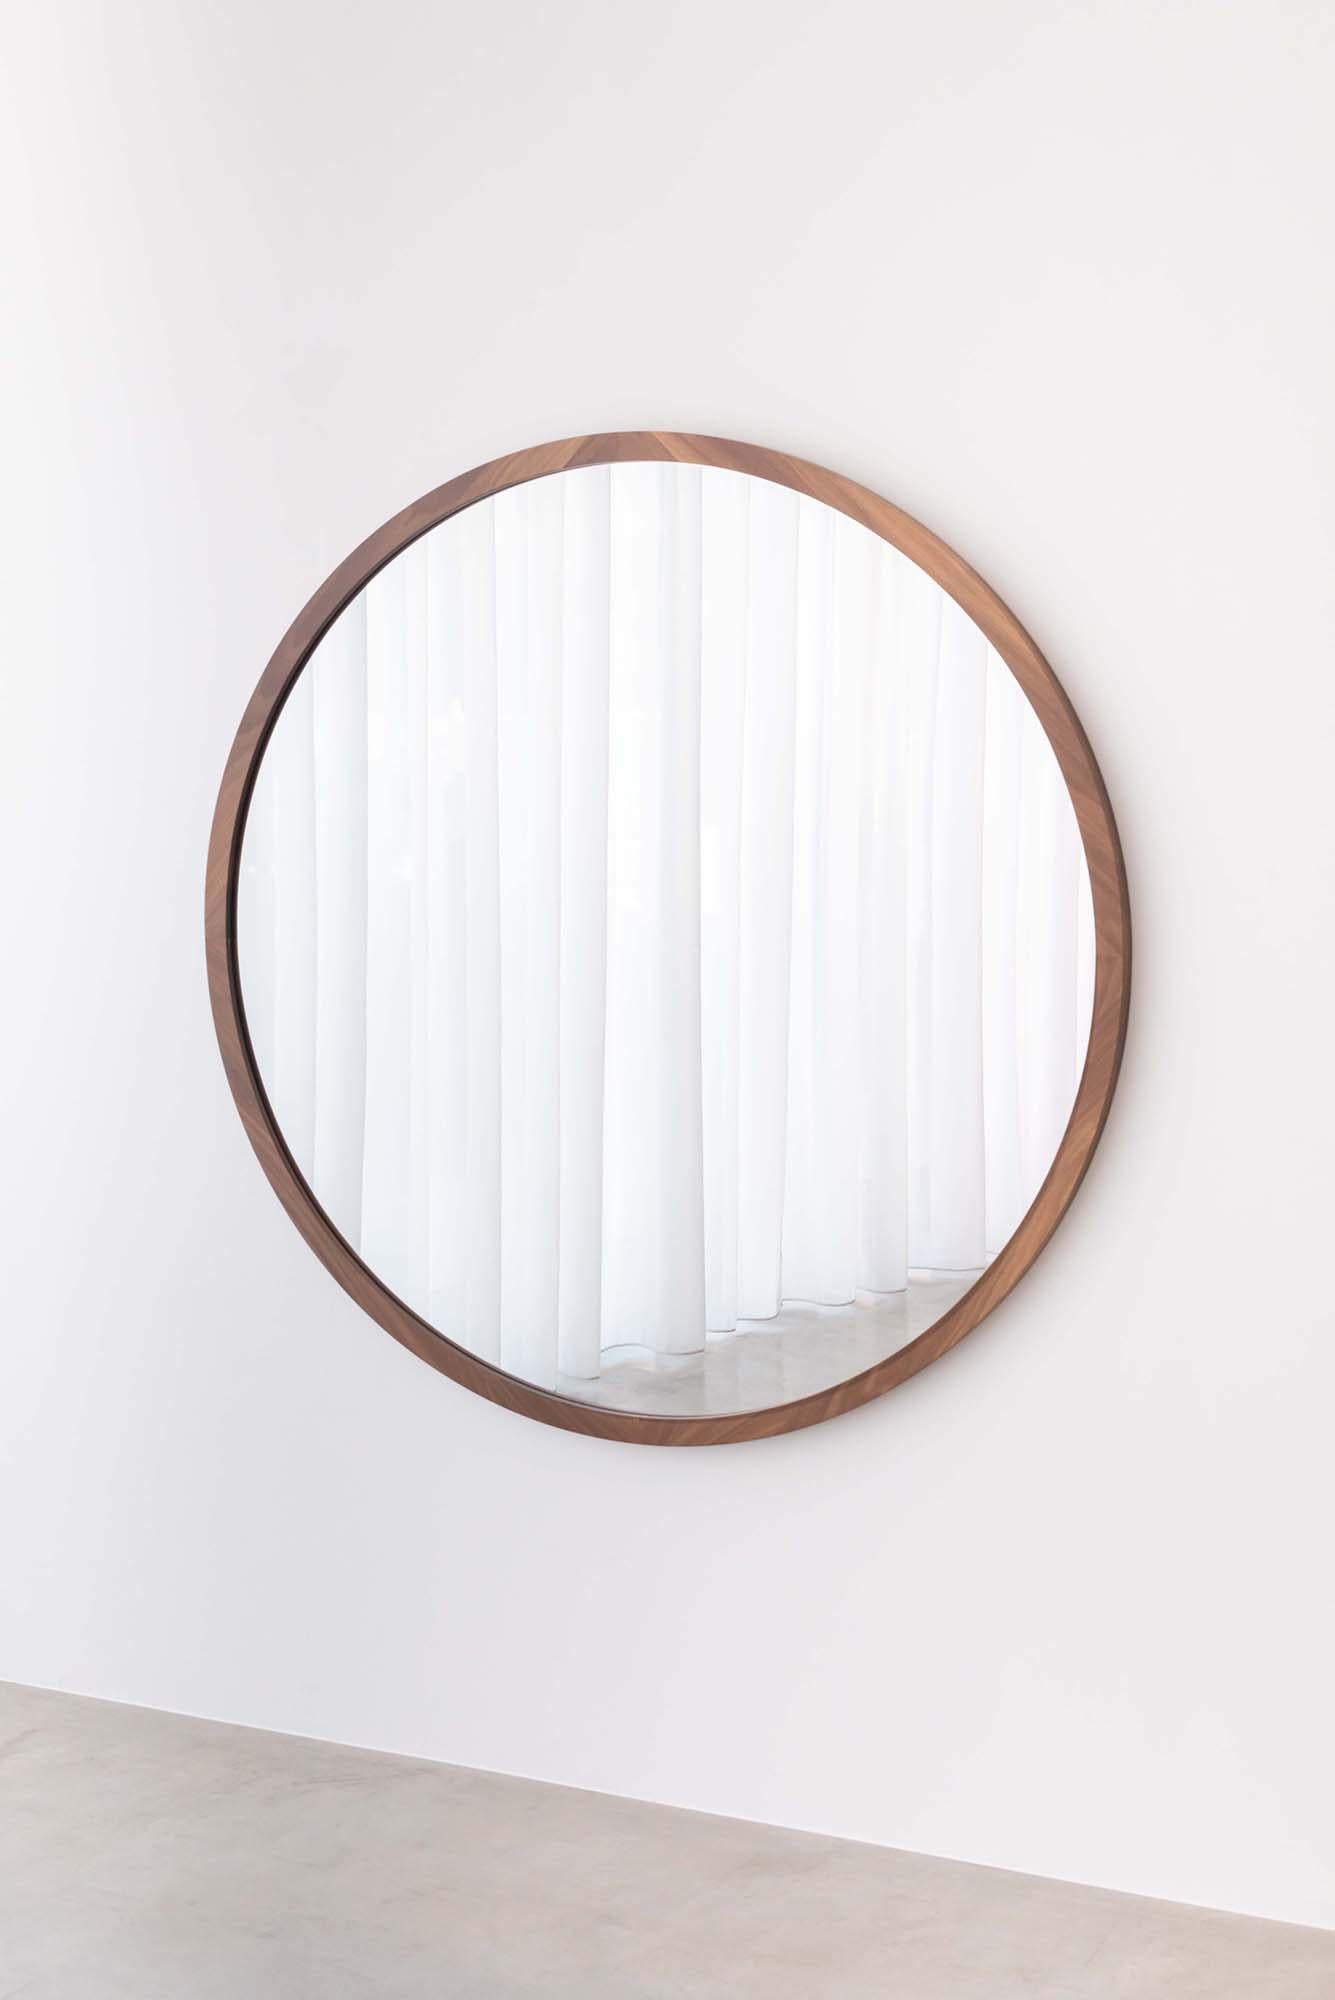 Frames in solid walnut design mirrors with simple shapes.
A large circumference reflect spaces of everyday life.
A reflection of light, a look, the detail of a room that reveals itself new in this frame: the mirror tells a lot about us. And it